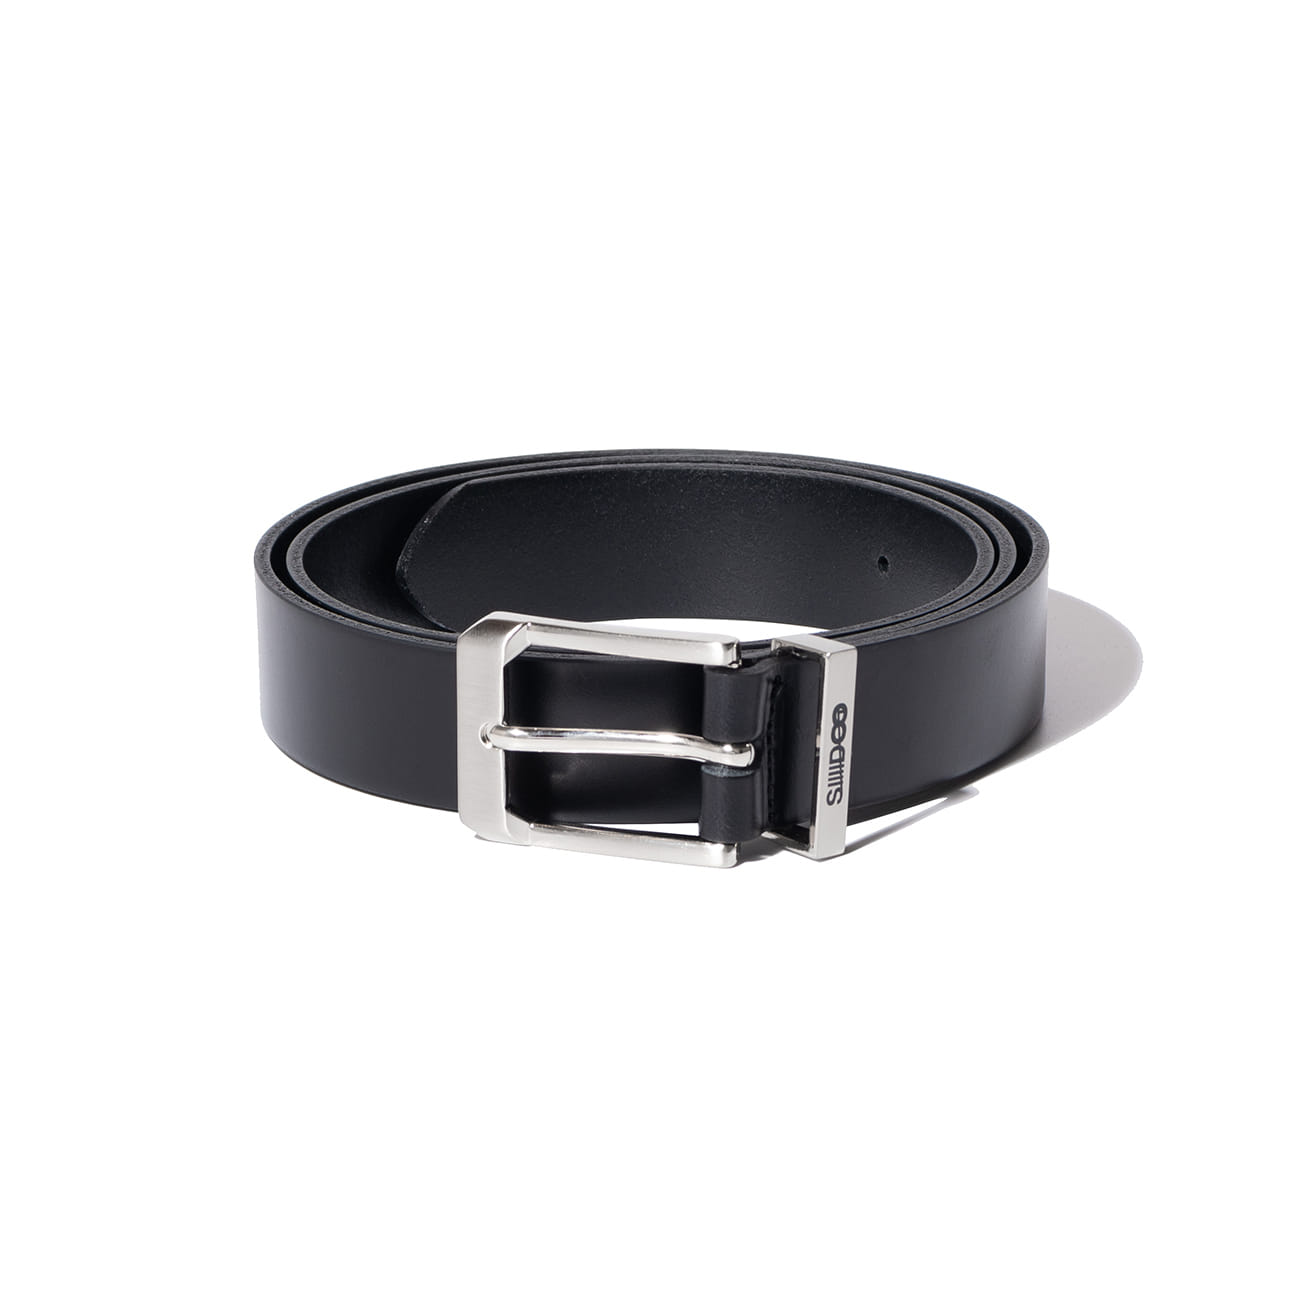 ONE RING SIMPLE LEATHER BELT 001